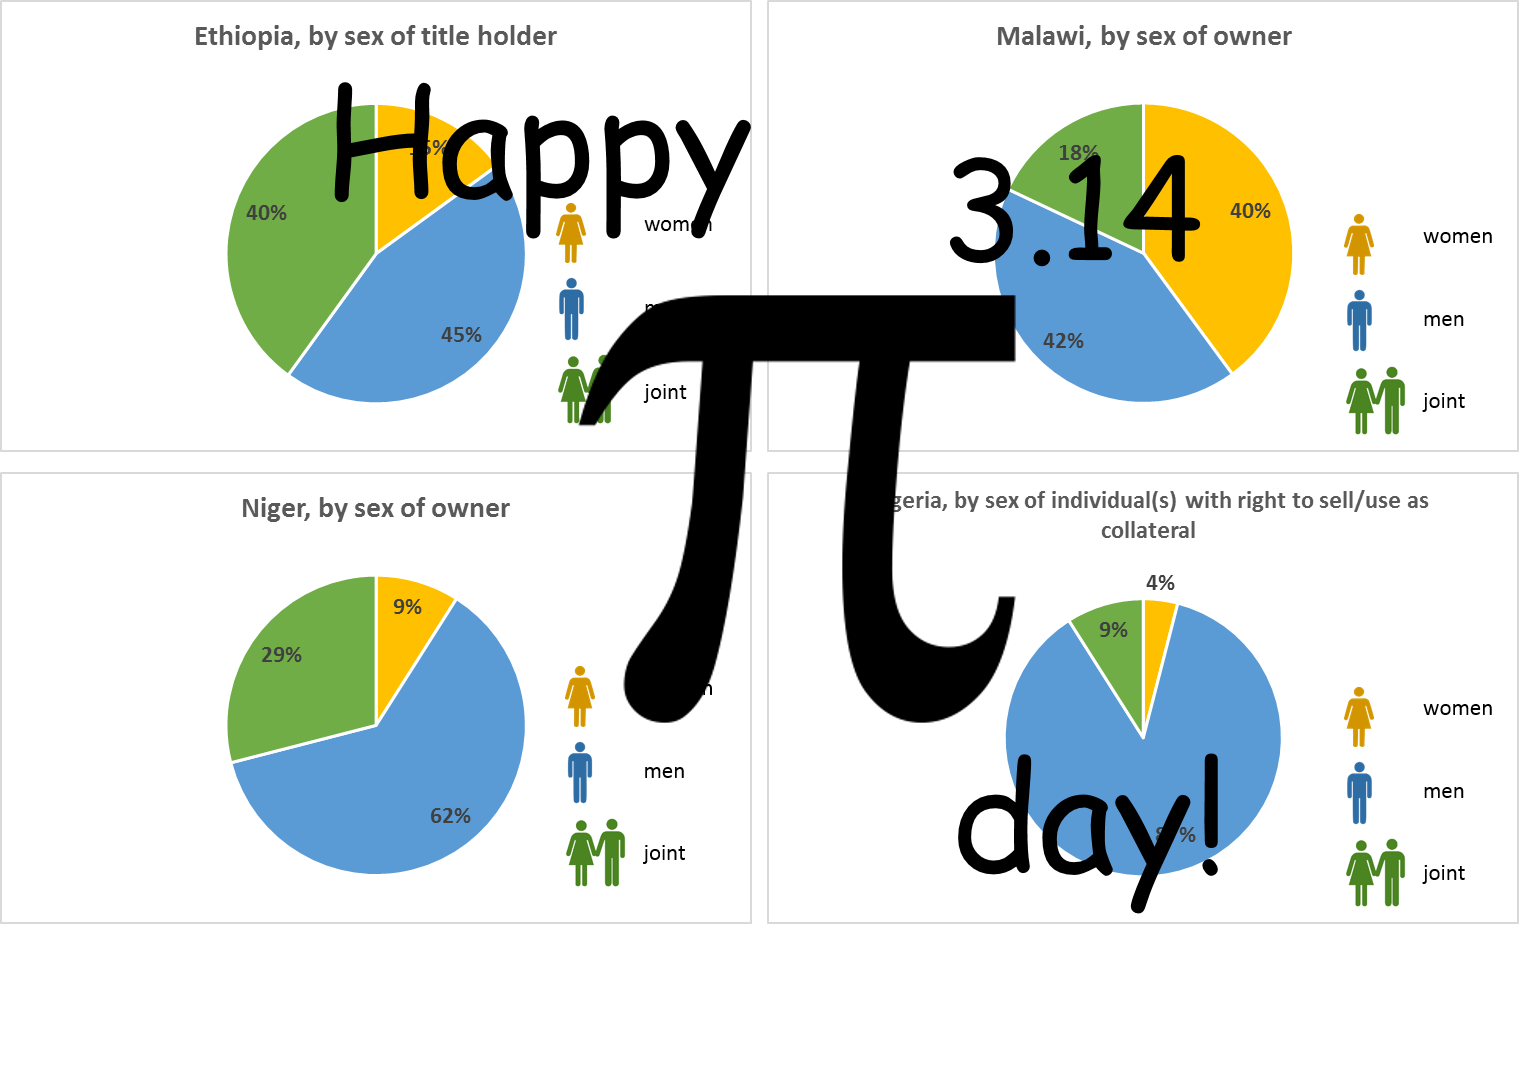 Celebrating Pi Day: What pie charts can tell us about gender gaps in control over land